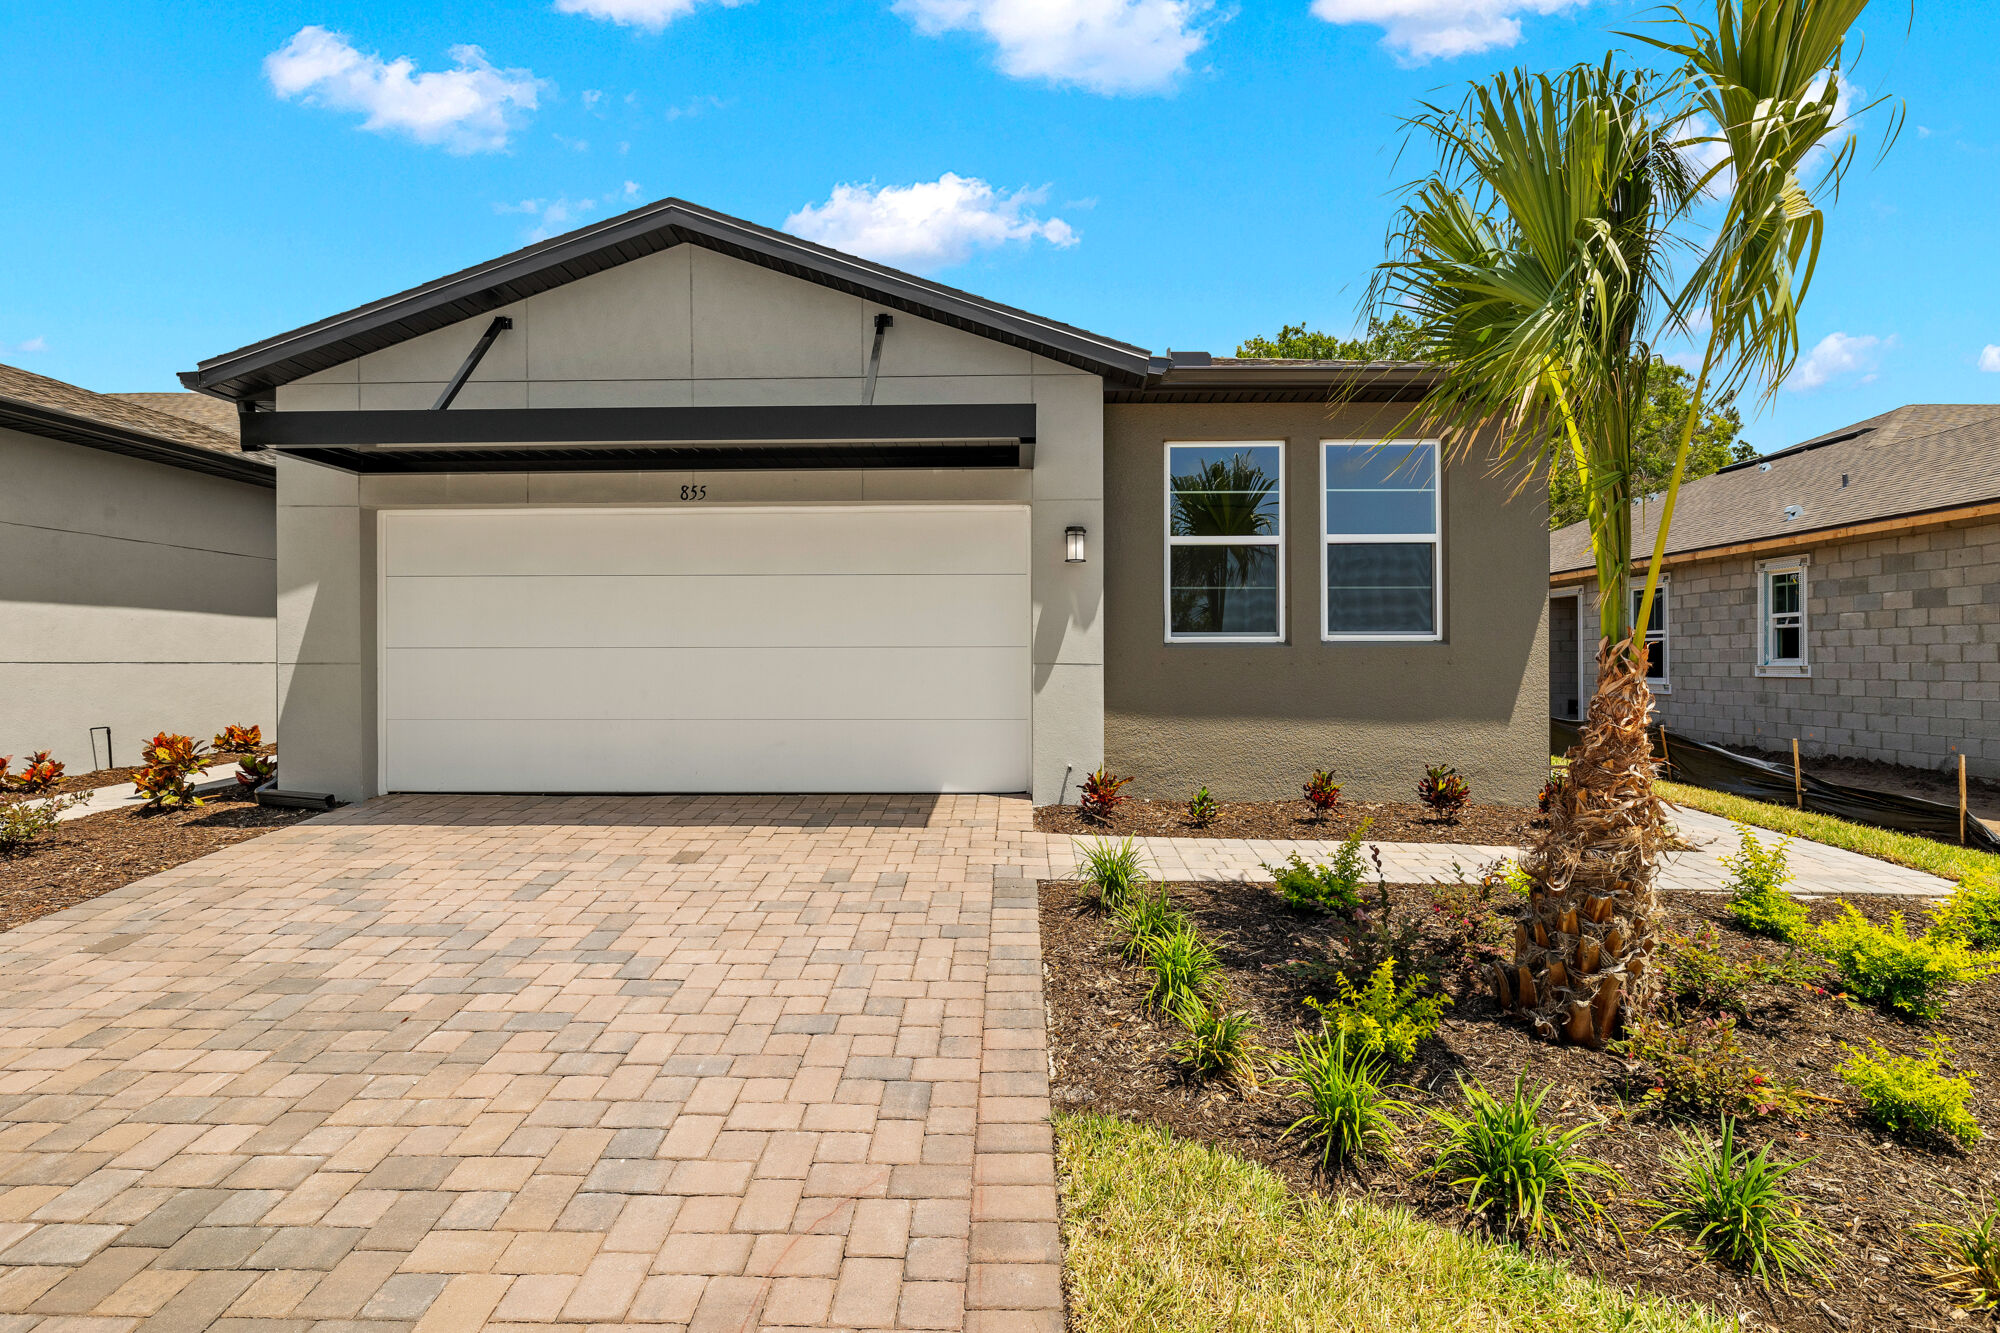 End unit villa with 3 bedrooms, study, 2 baths, 2-car garage. open concept plan, owners bath with shower, walk-in closet, dual sink raised vanity and linen closet. Breakfast bar on island in kitchen, 